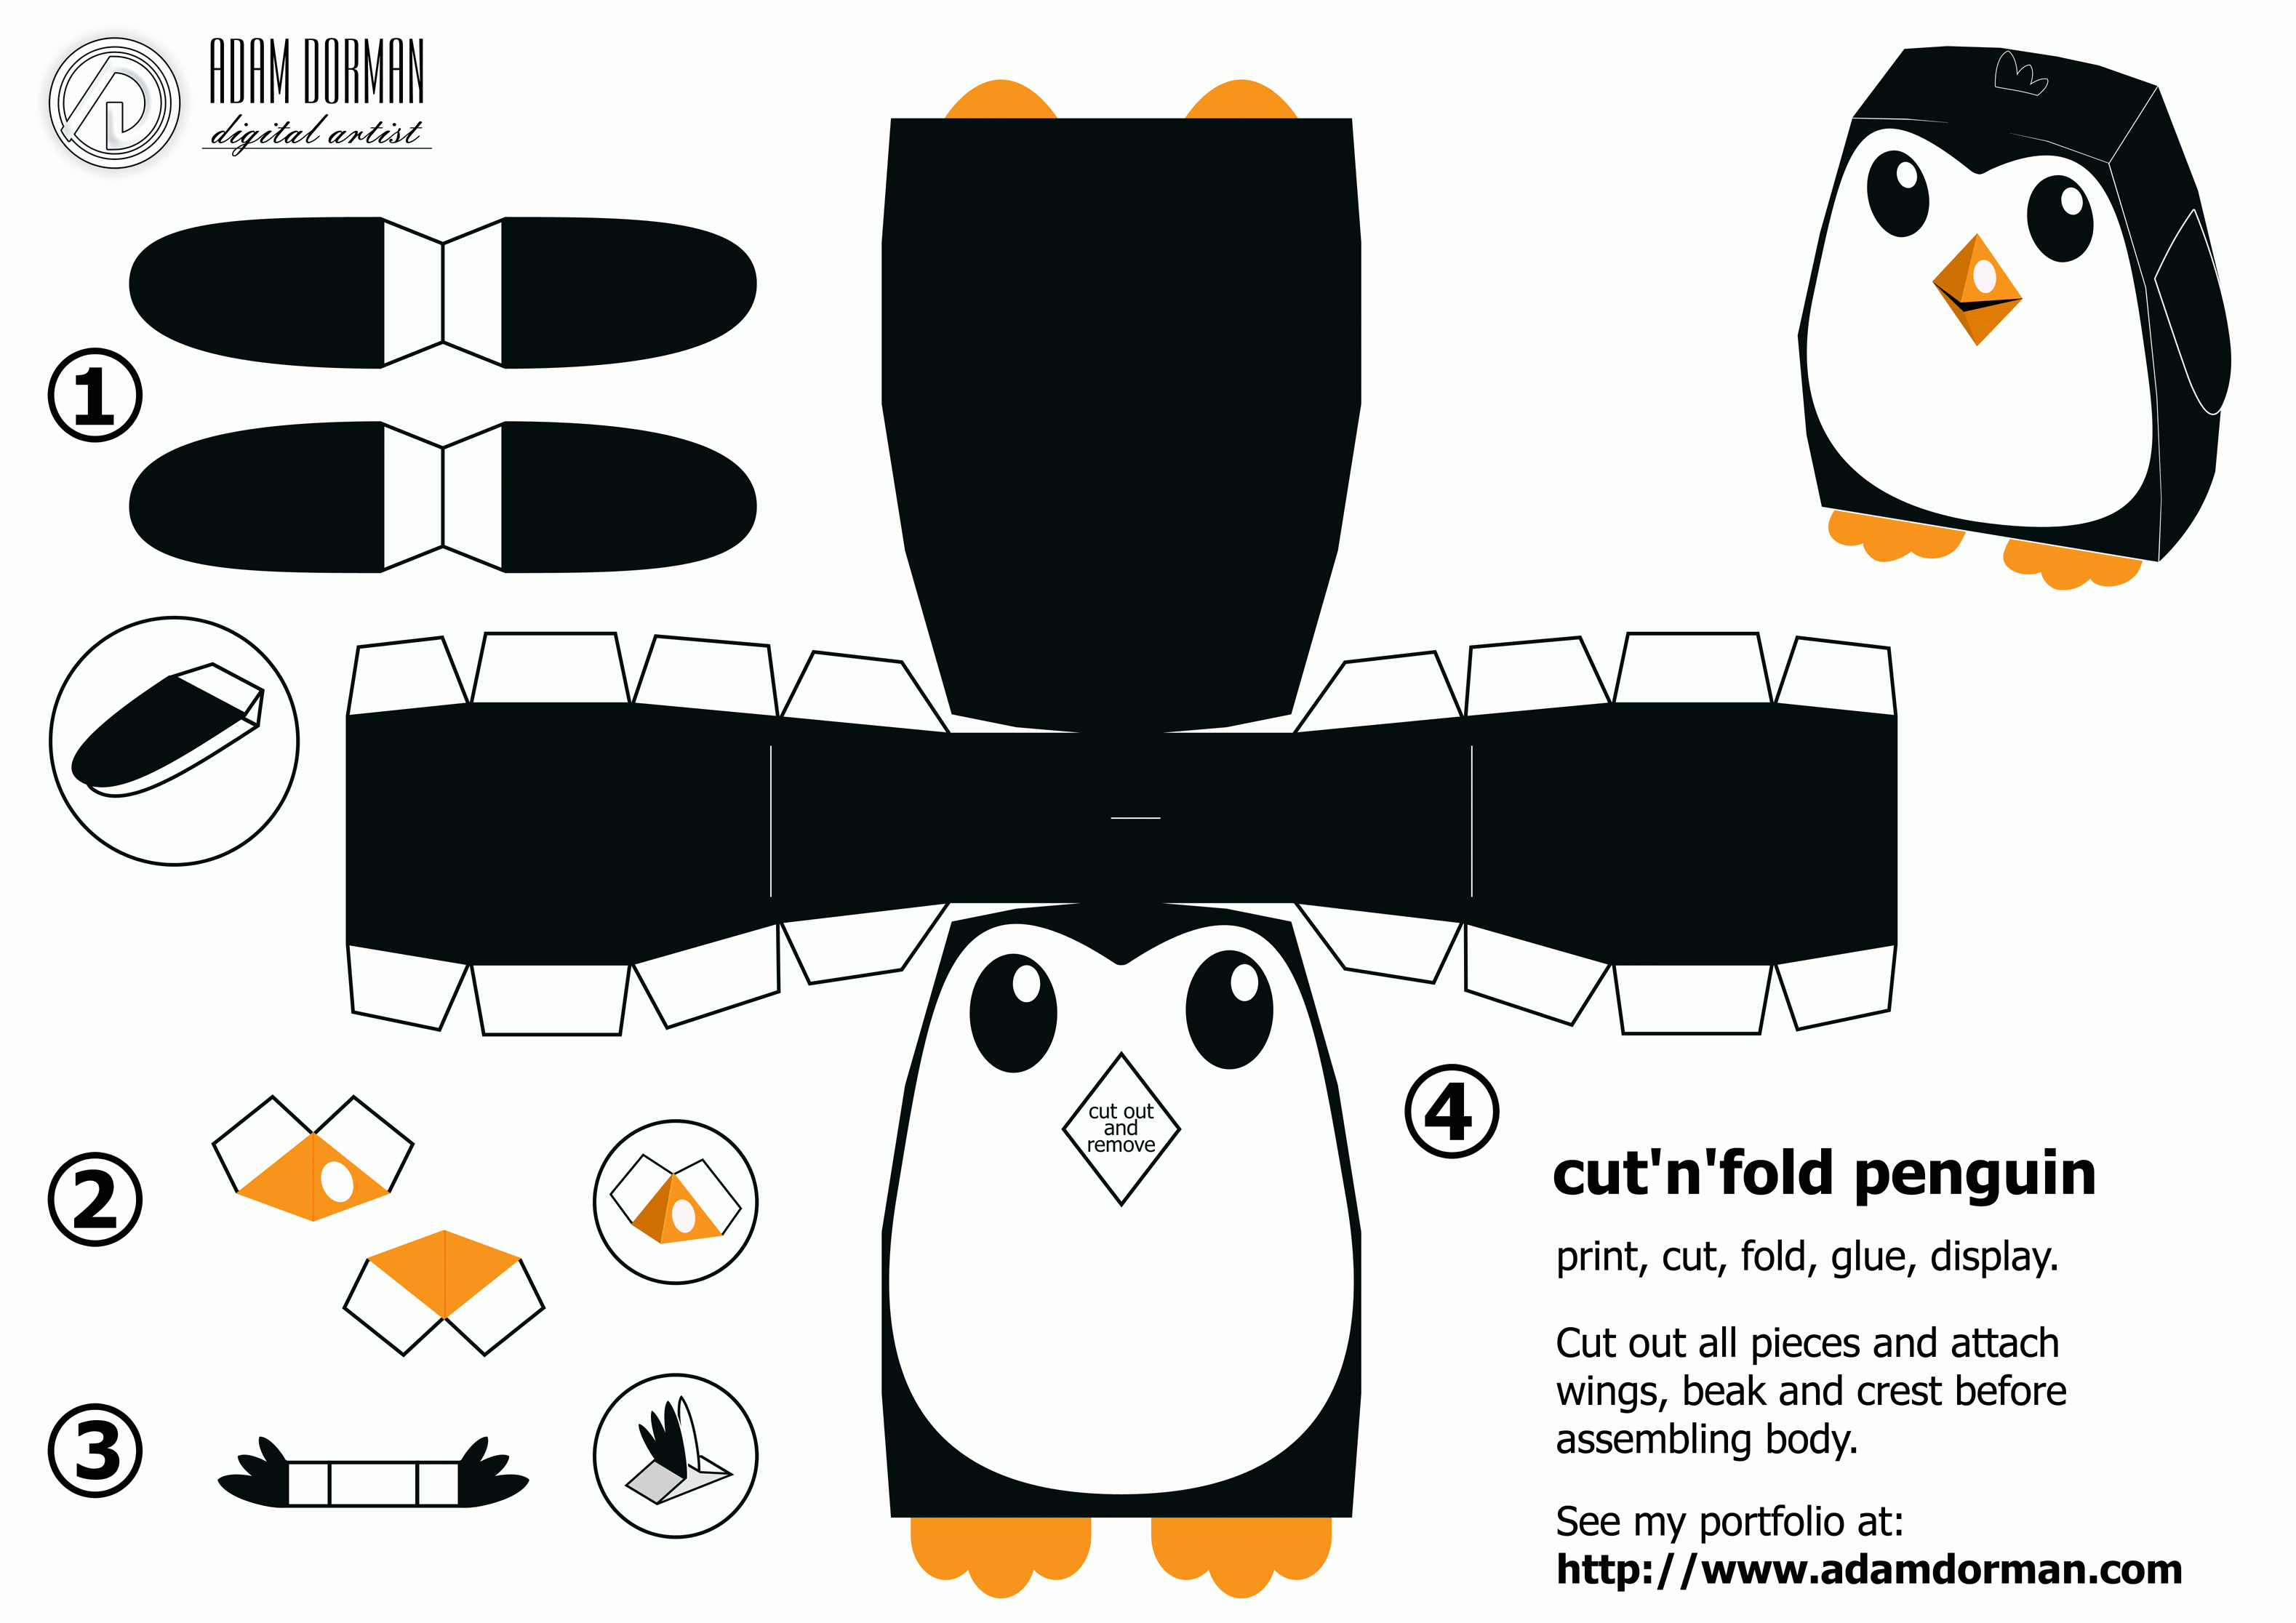 Printable Crafts | Simply Download The Pdf Or Graphic Image Of The - Printable Paper Crafts Free